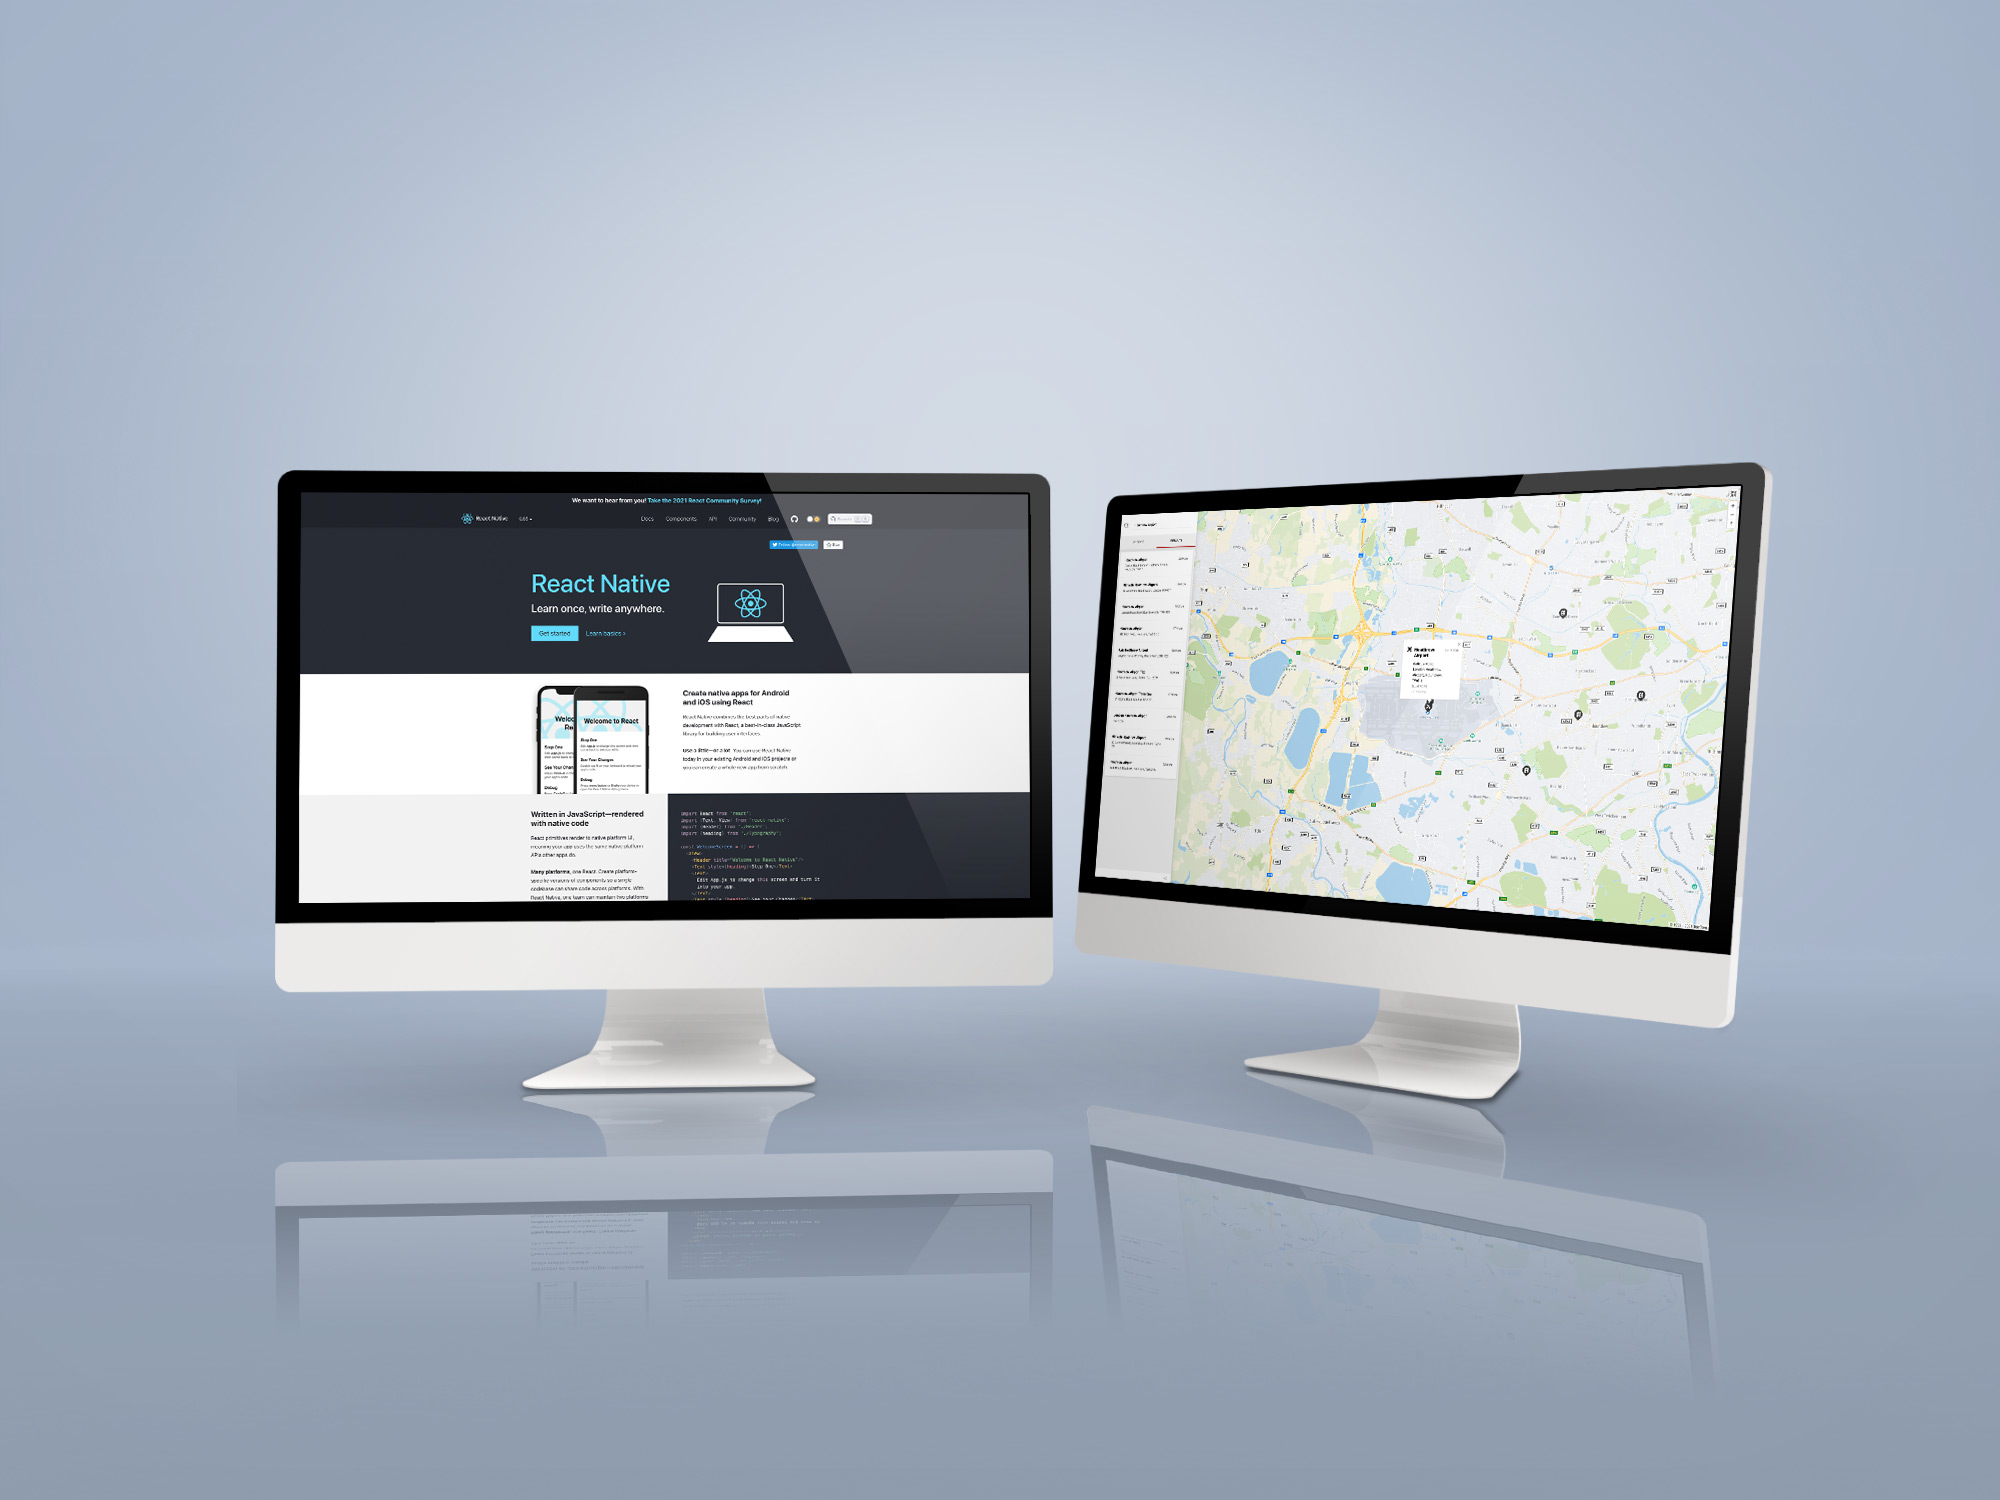 Two desktop computers side by side showing a map and React Native platform